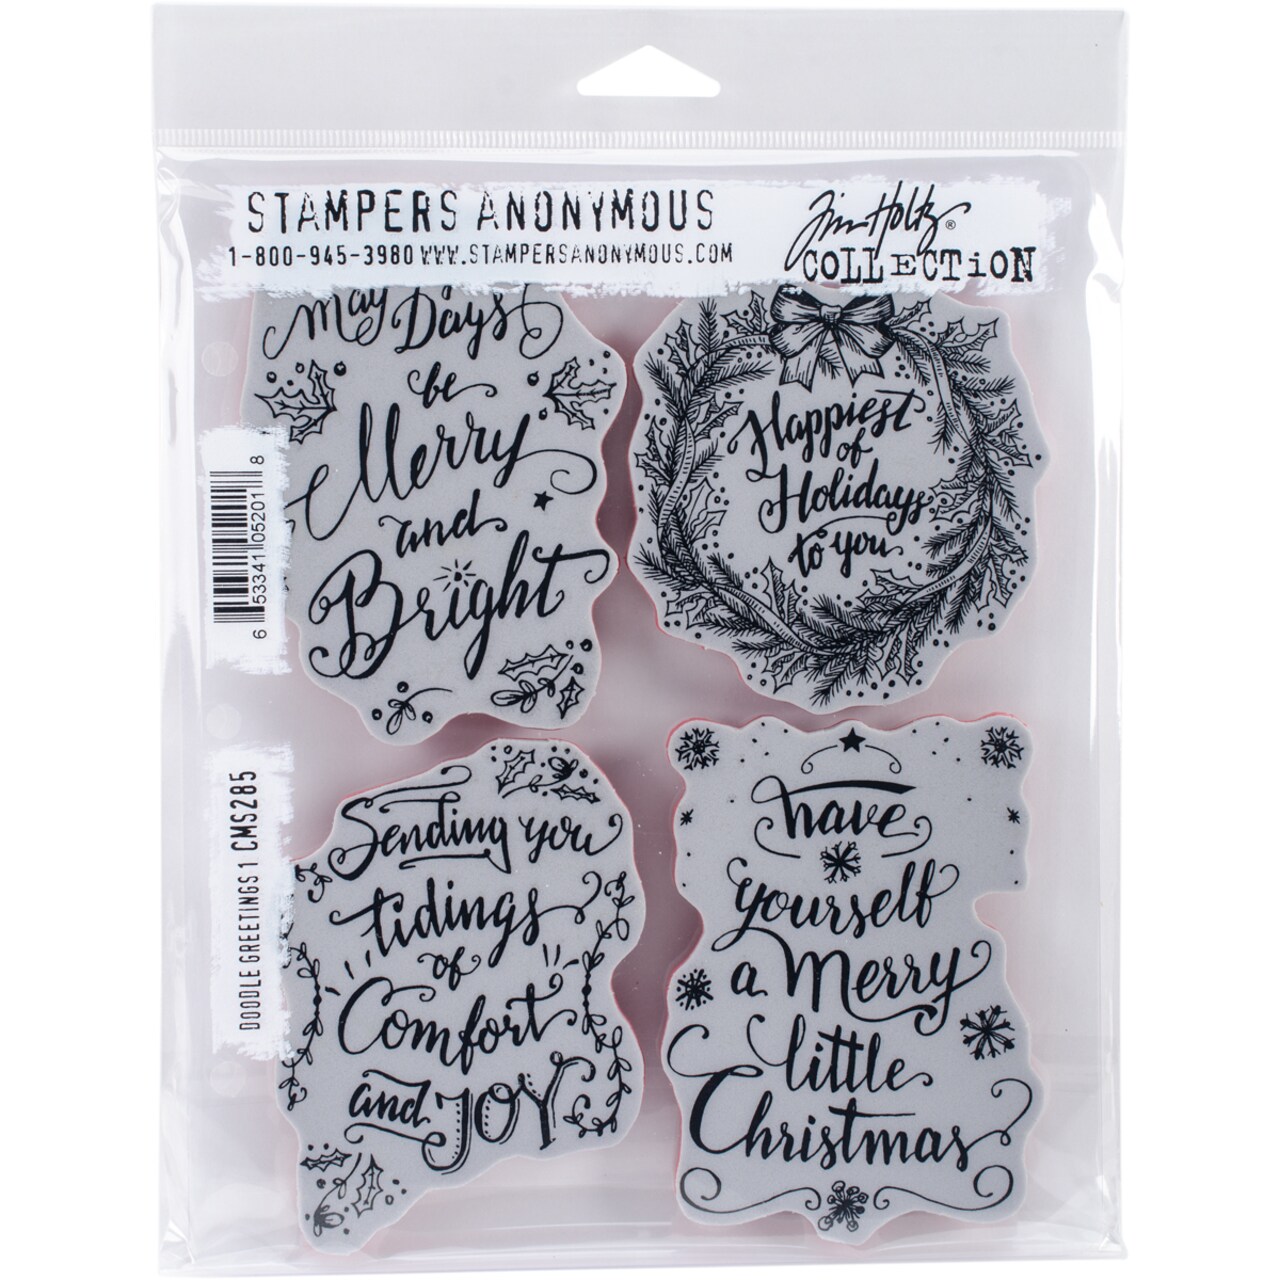 Tim Holtz Cling Stamps 7X8.5-Doodle Greetings #1